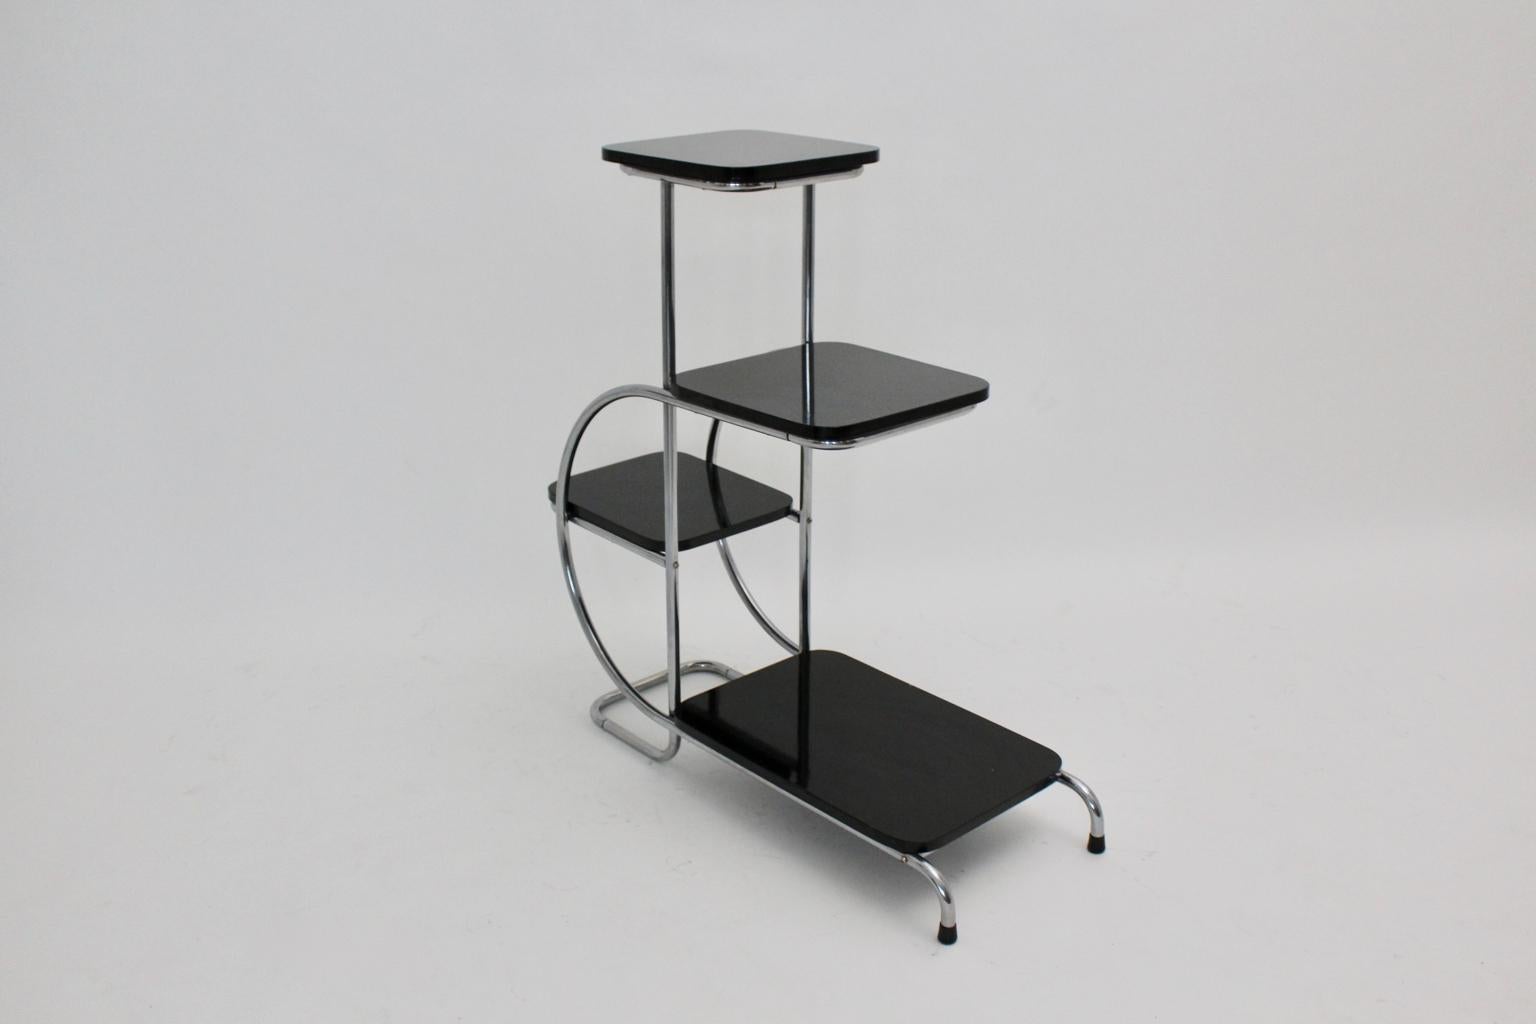 French Art Deco Vintage Chromed Metal Black Wood Side Table by Emile Guyot 1930s France For Sale